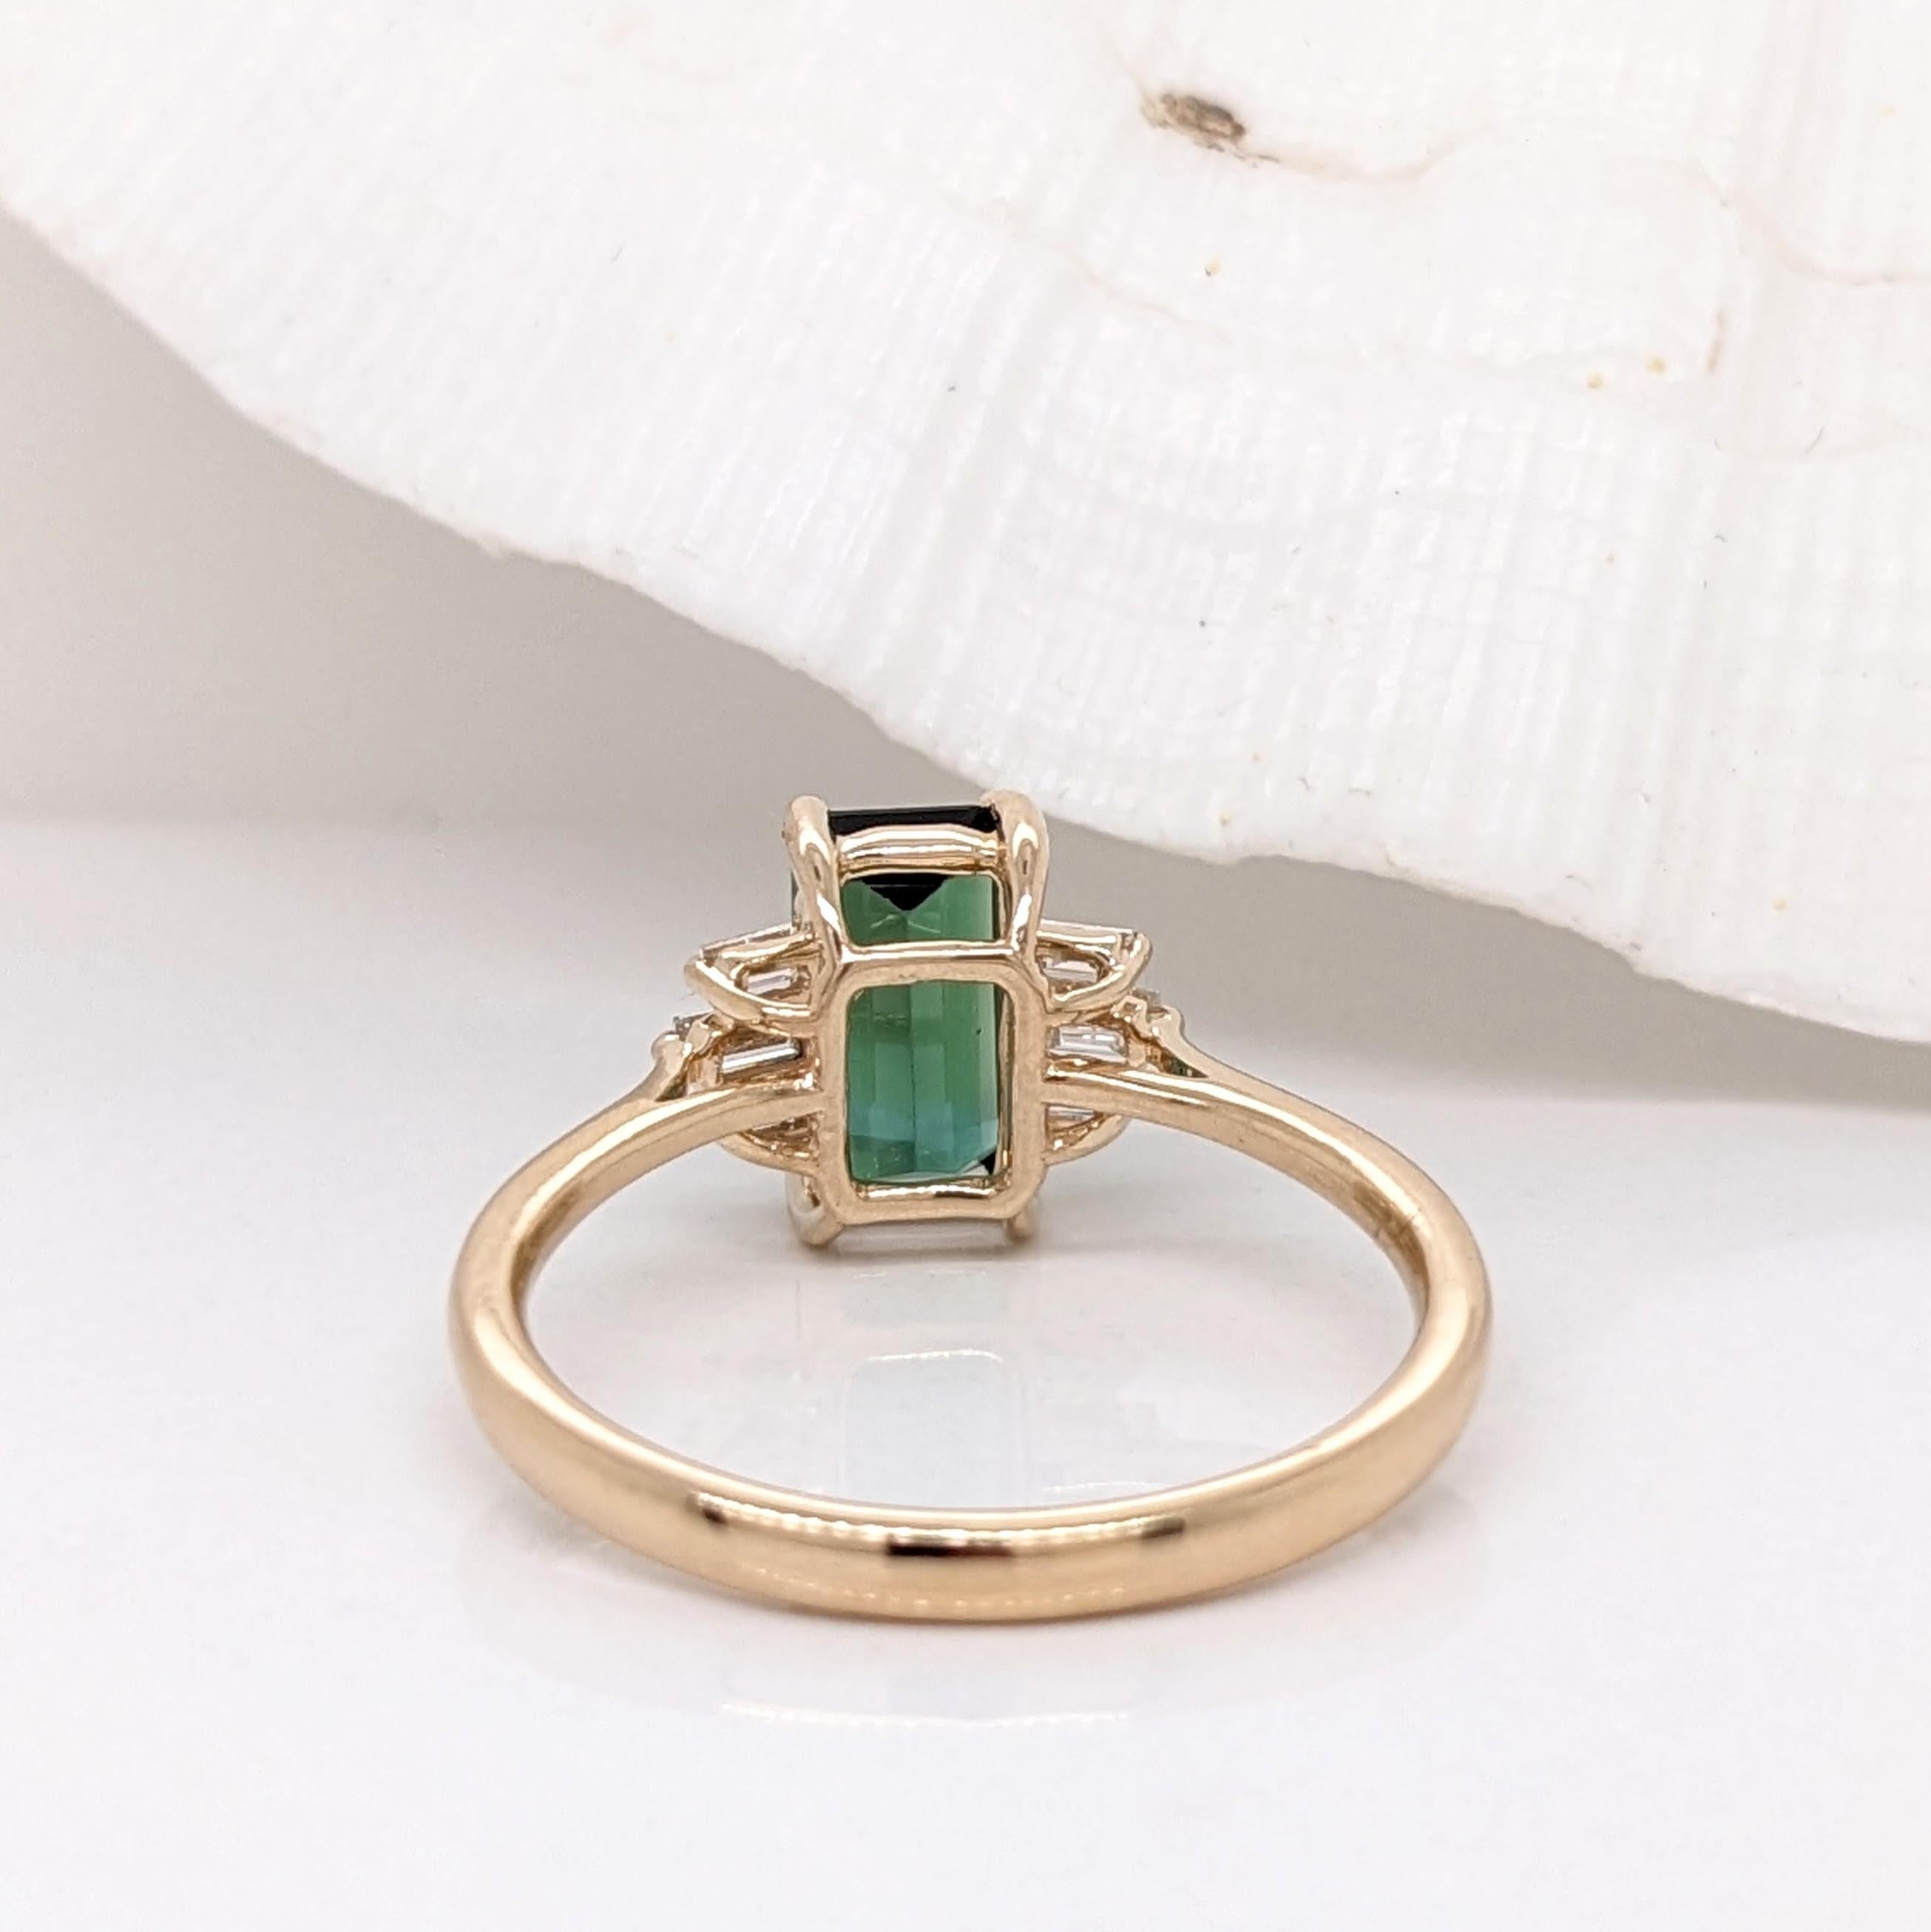 1.2ct Tourmaline Ring w Diamond Accents in 14K Solid Yellow Gold Emerald 9x5mm In New Condition For Sale In Columbus, OH